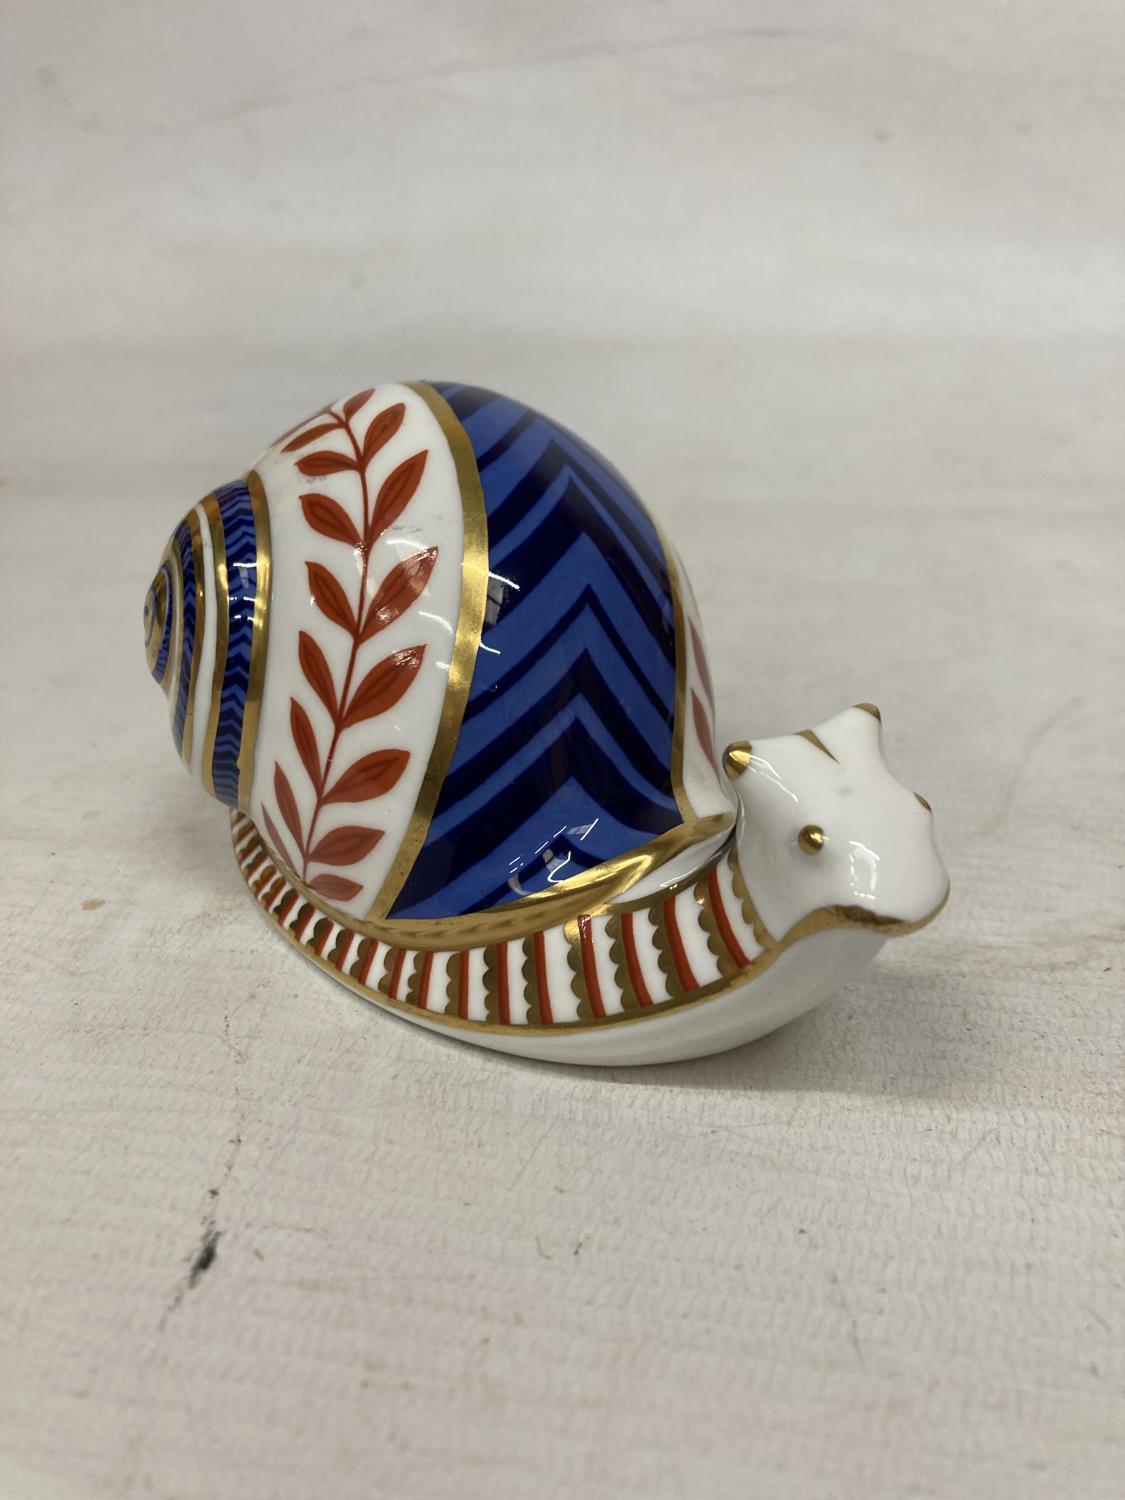 A ROYAL CROWN DERBY SNAIL (SECOND) - Image 2 of 6